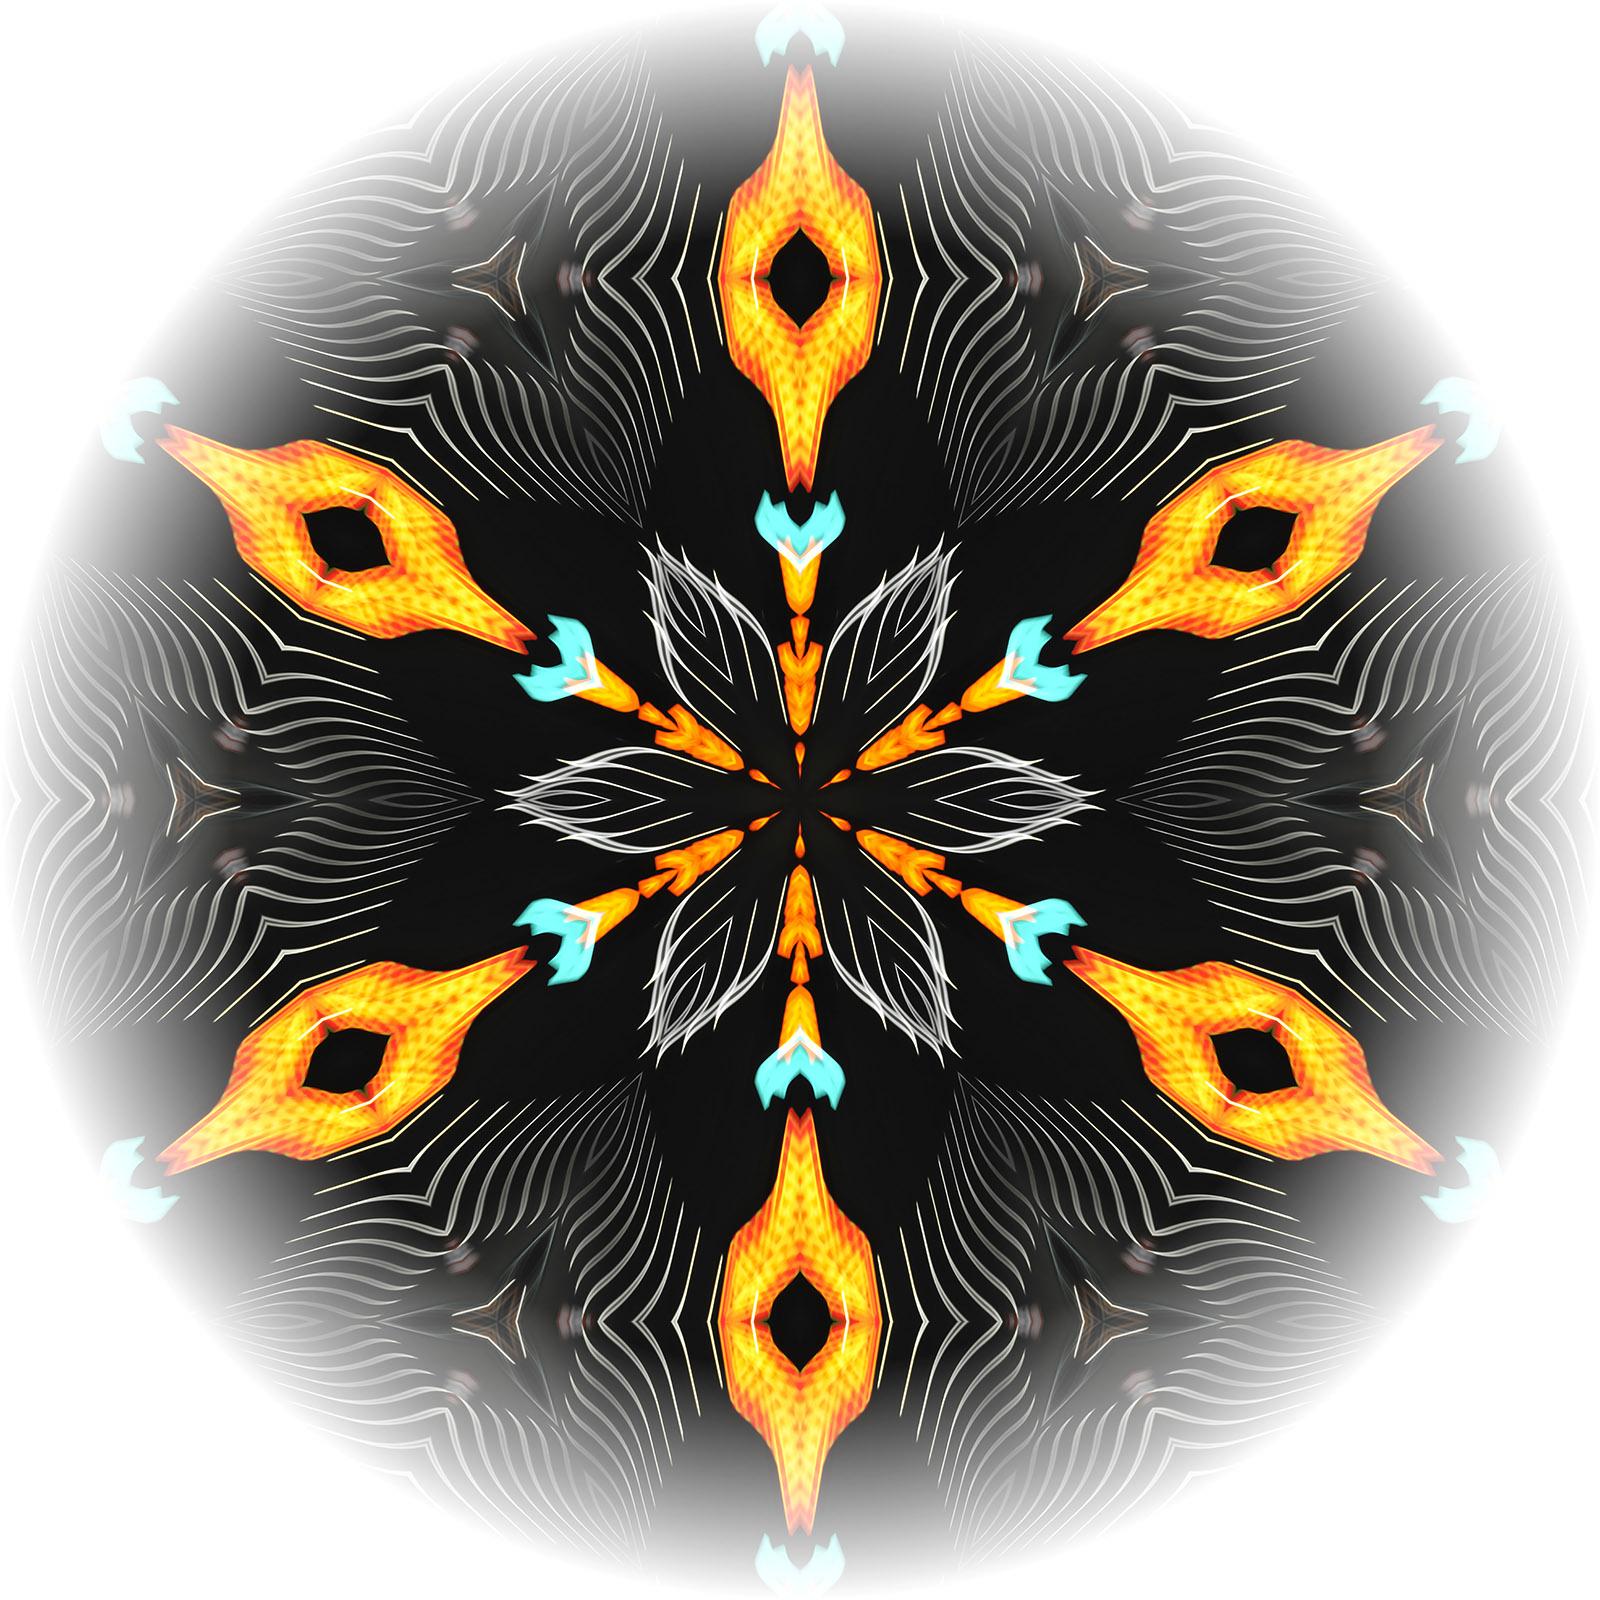 Light Mandala2 - Signed limited edition pigment print, Color Photography, Square 4